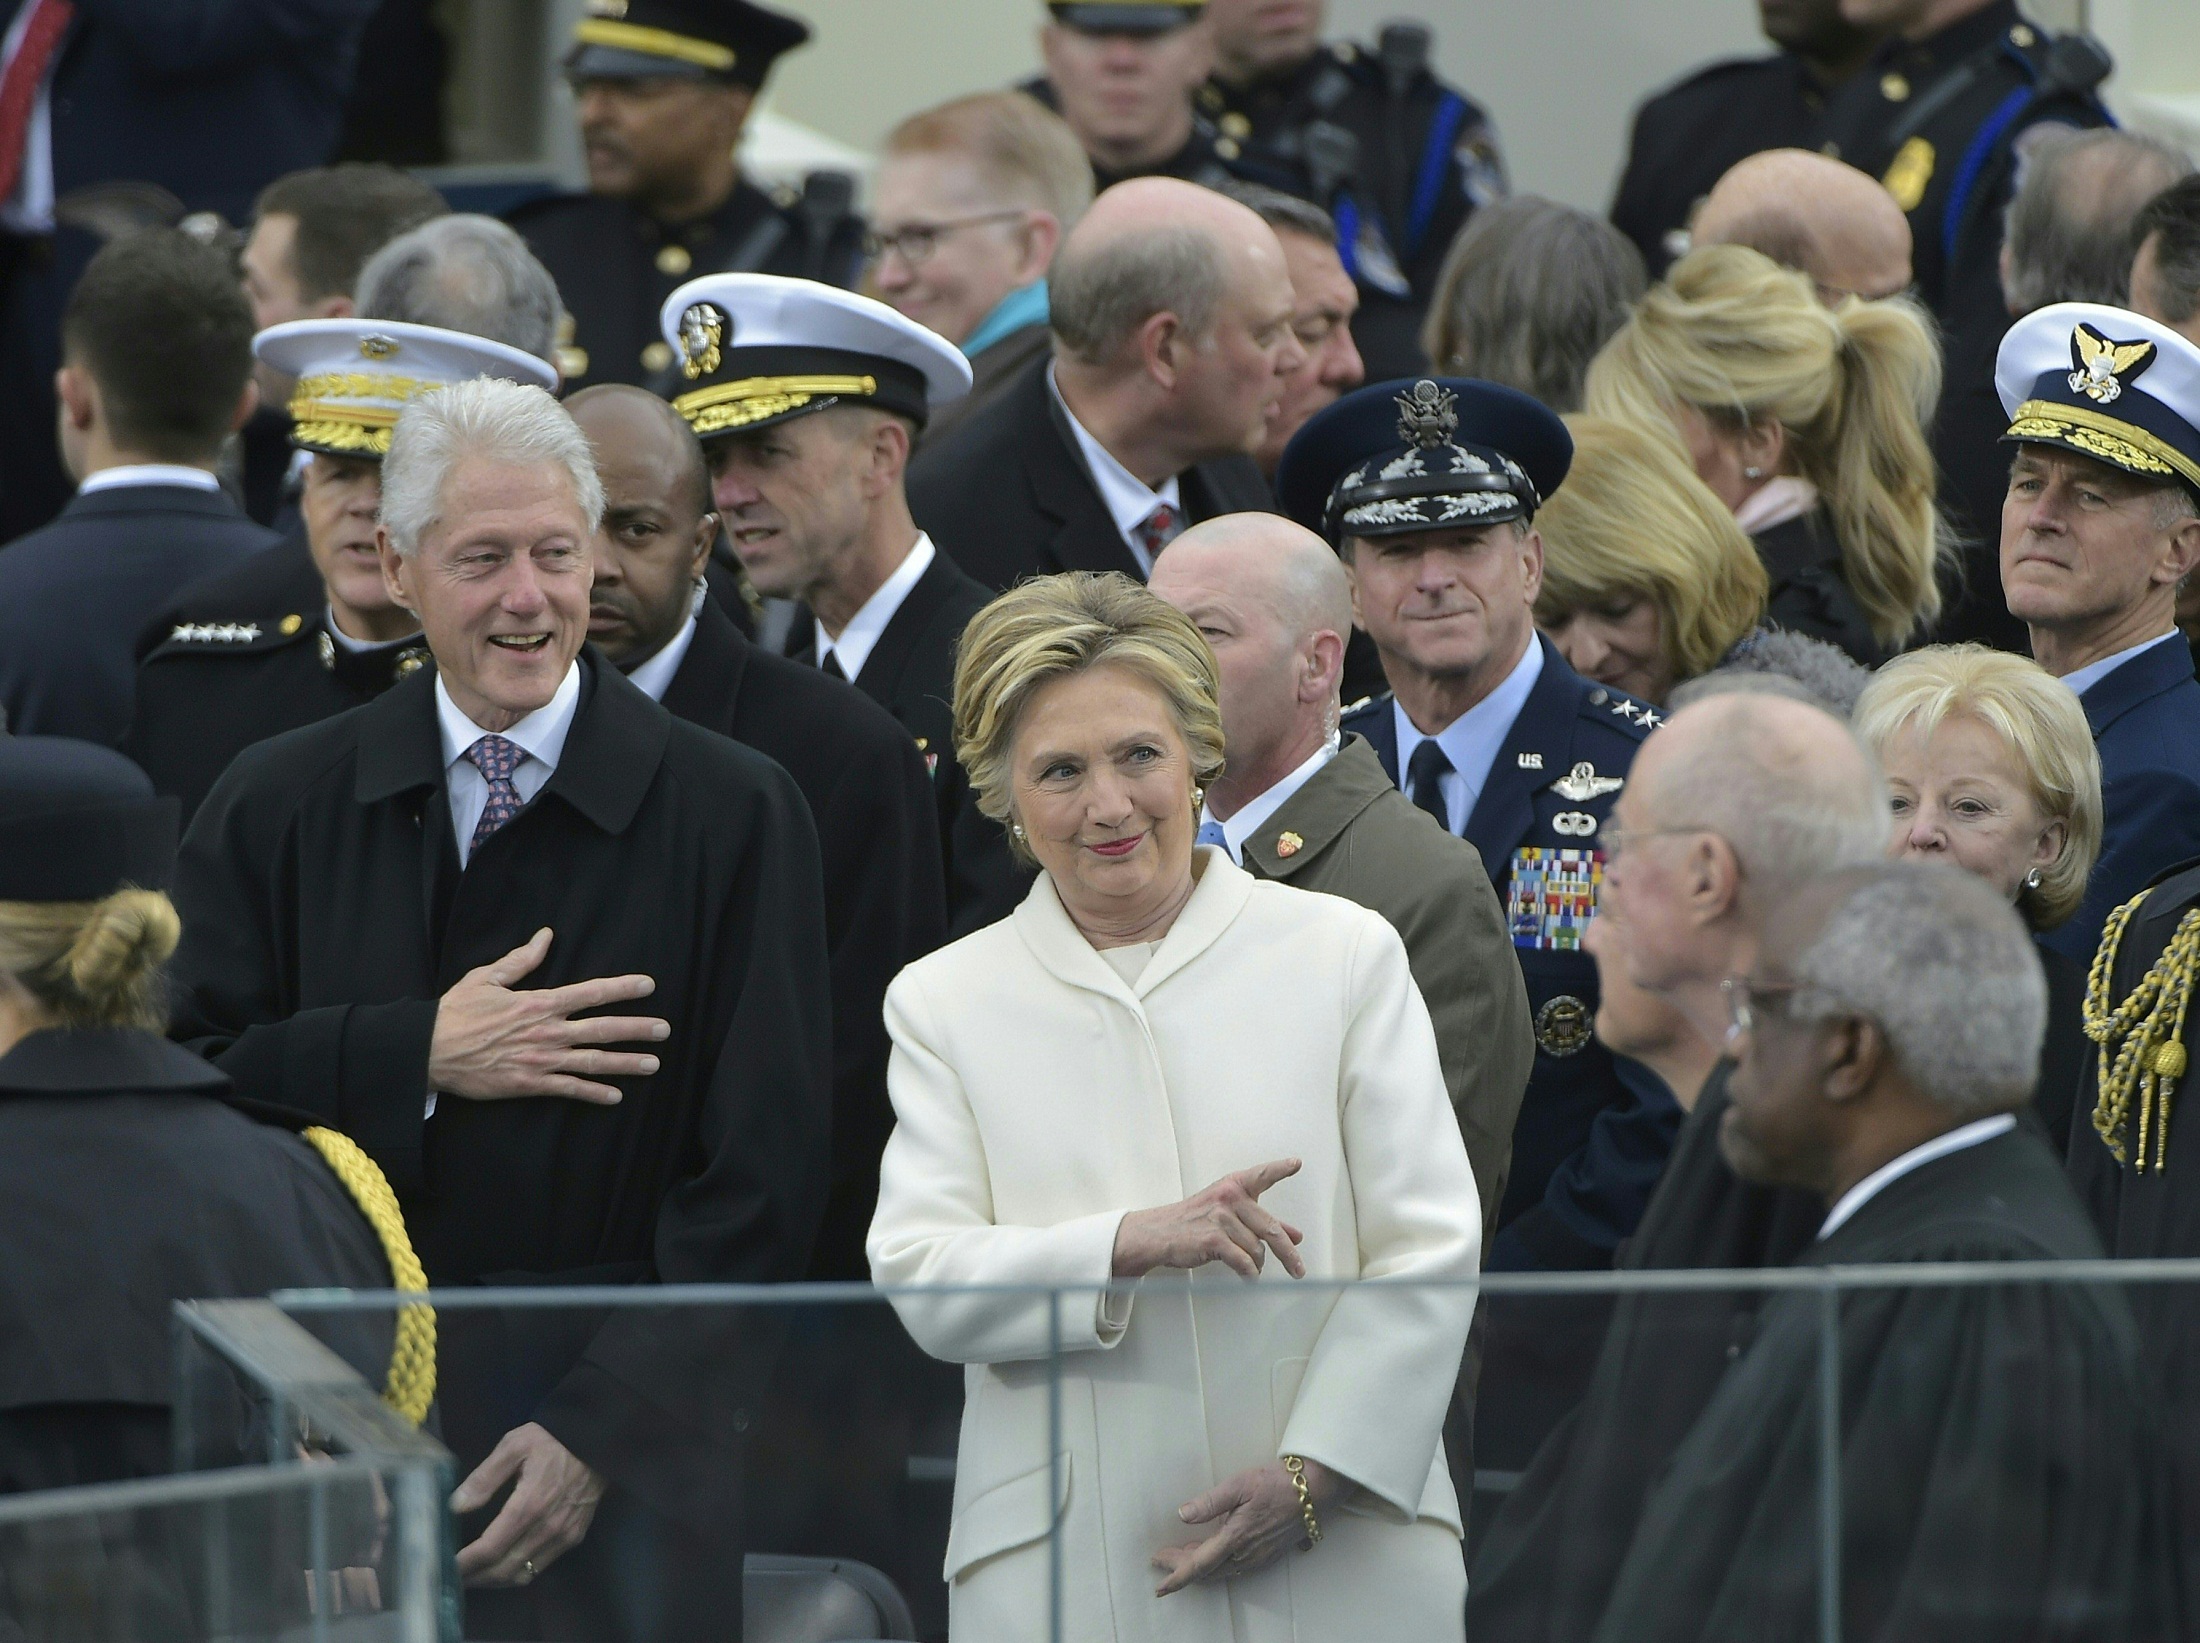 Former Democratic presidential candidate Hillary Clinton and former president Bill Clinton are seen amidst guests on the platform at the US Capitol in Washington, DC, on January 20, 2017, before the swearing-in ceremony of US President-elect Donald Trump. / AFP PHOTO / Mandel NGAN